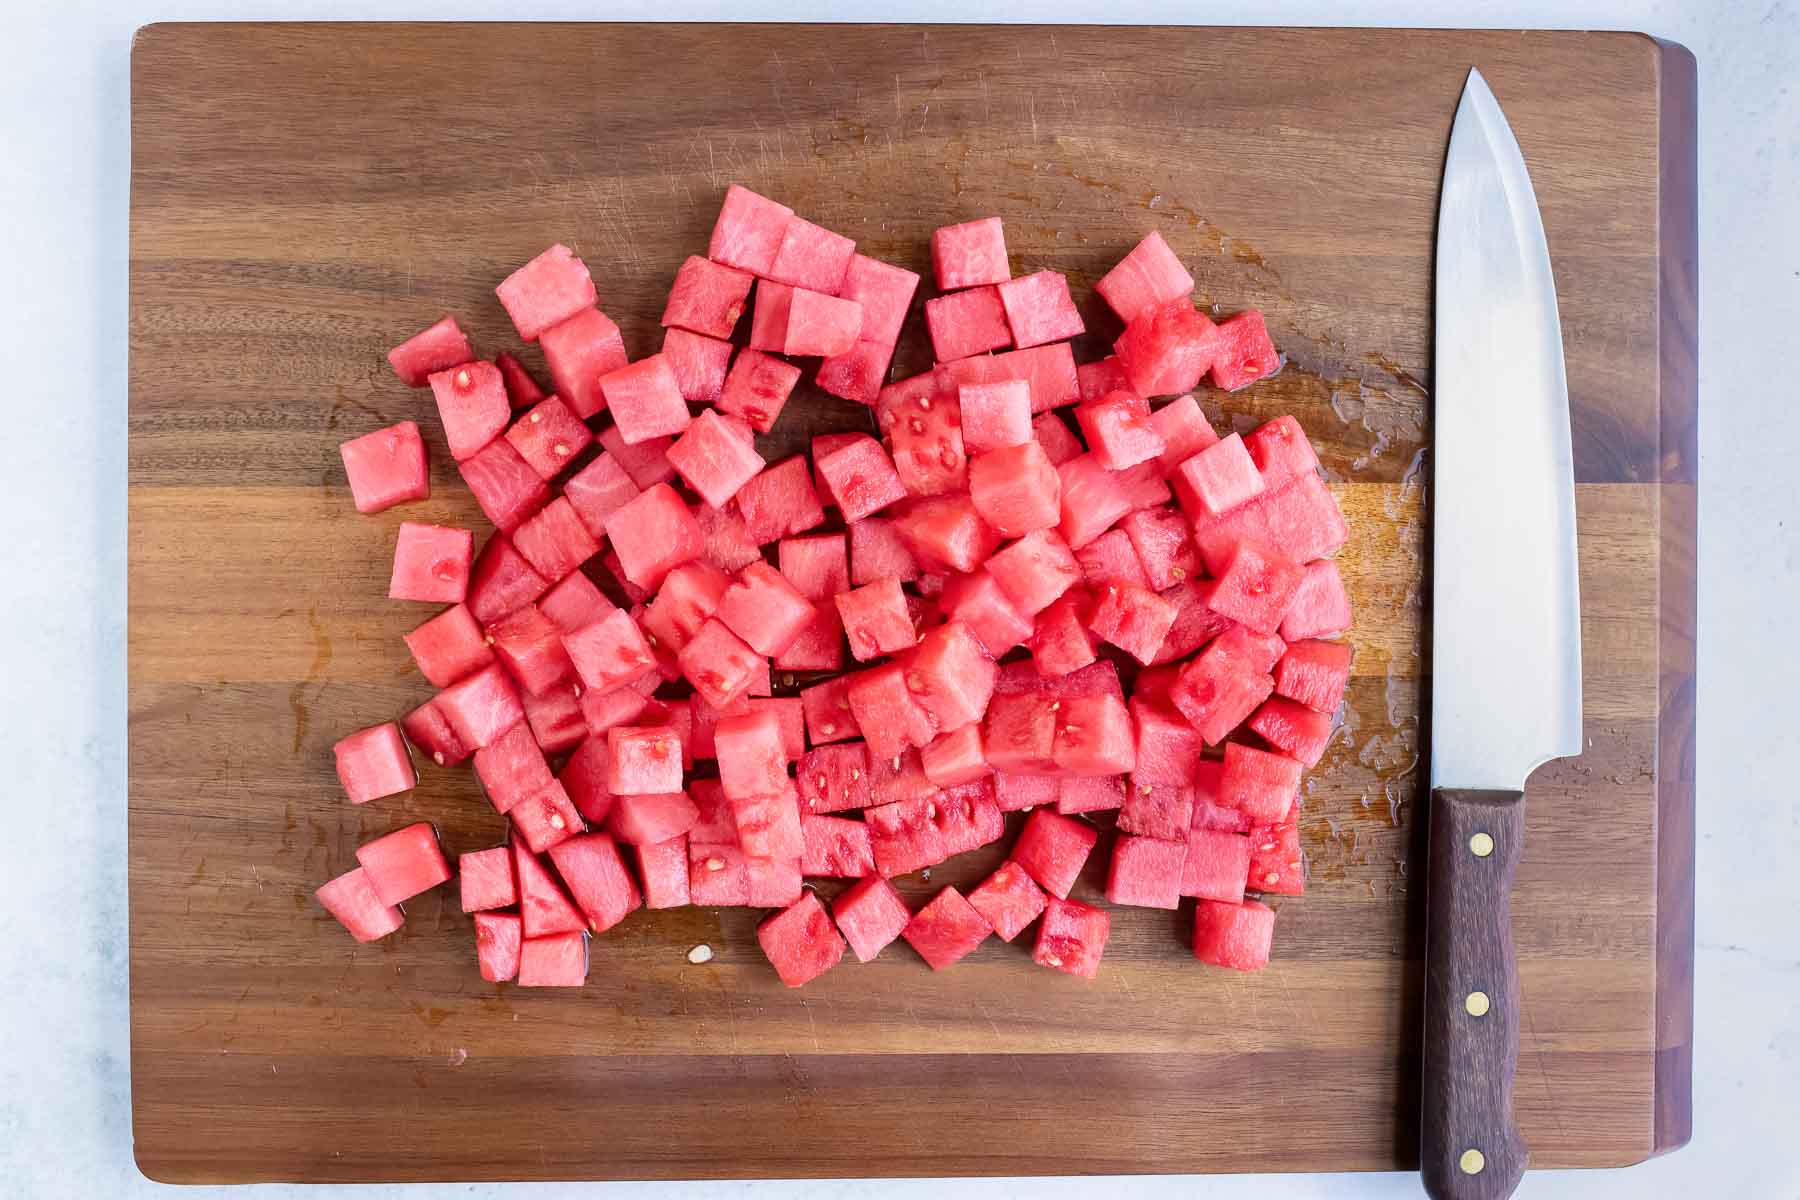 Cubed watermelon is prepped for this recipe.